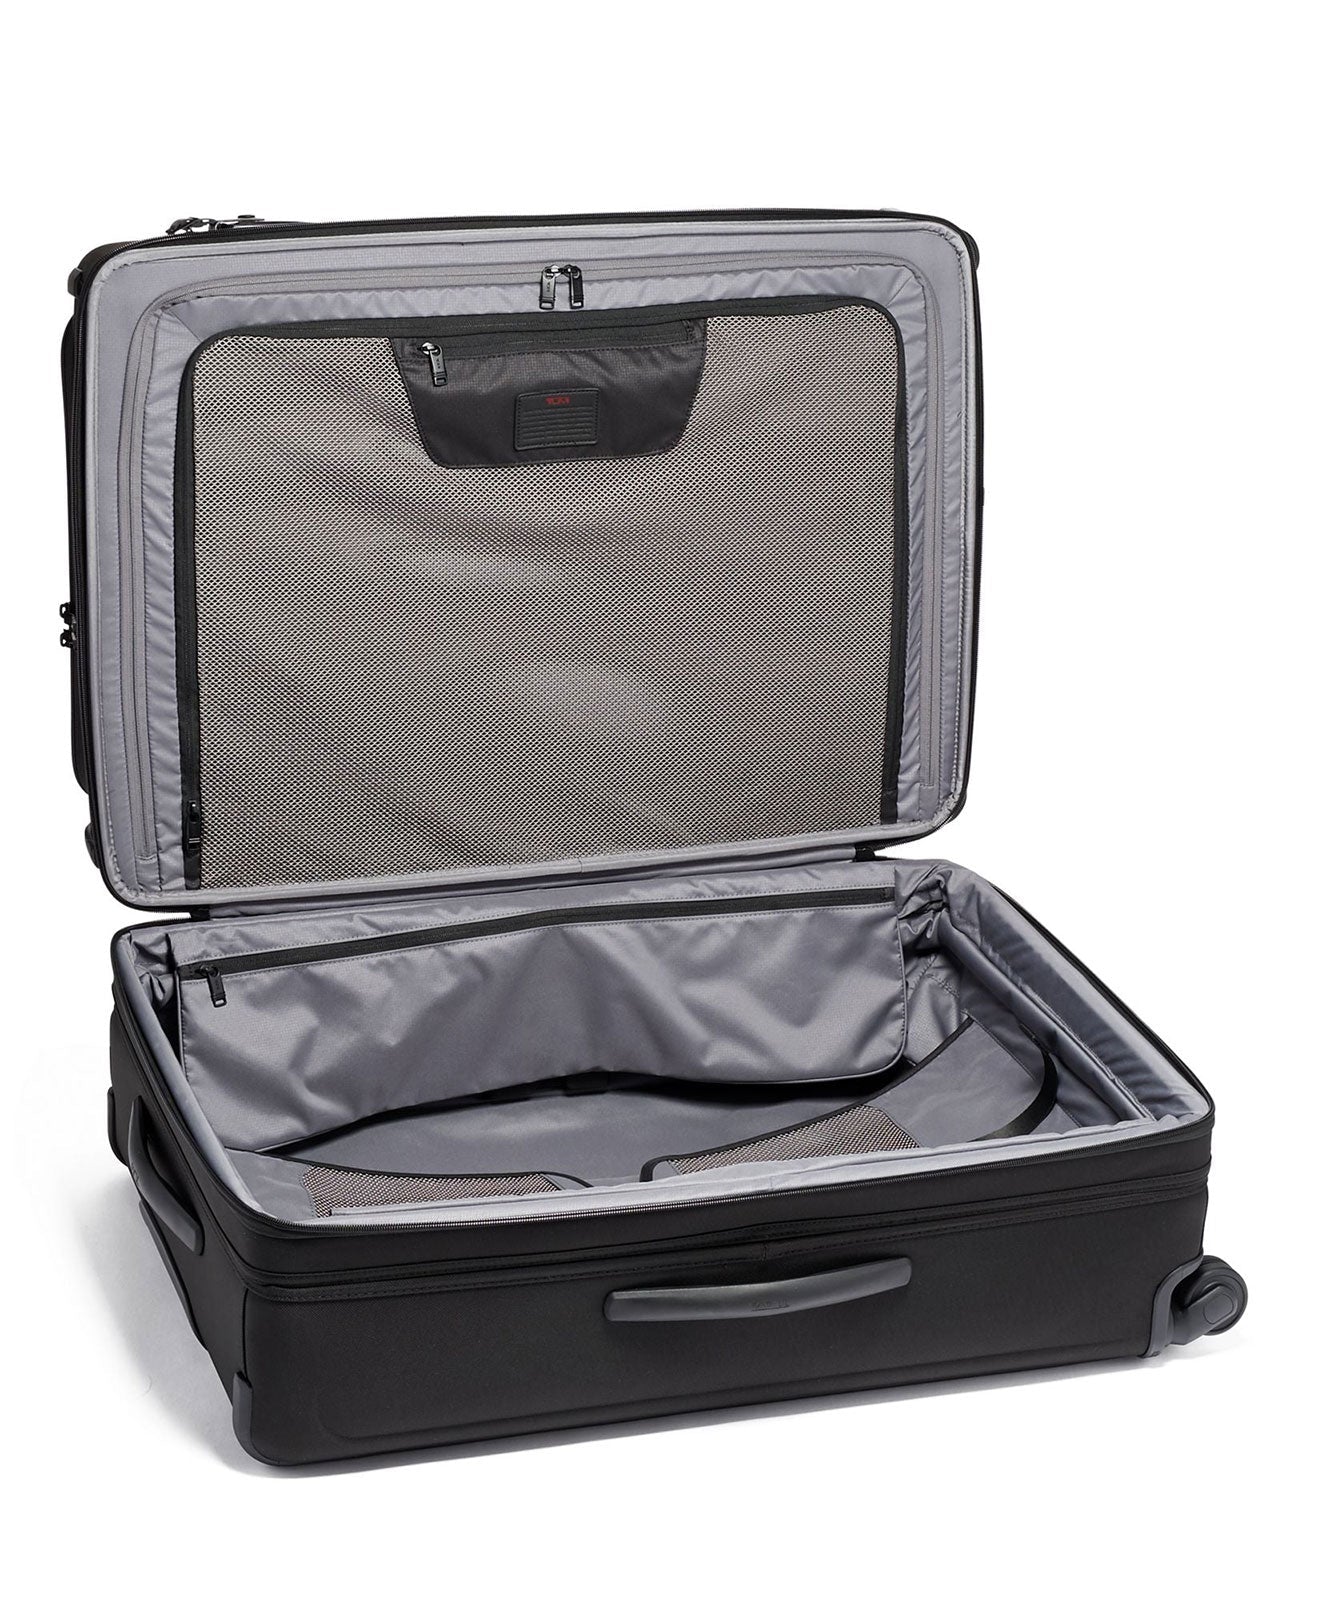 Tumi Extended Trip Expandable 4 Wheeled Packing Case, Black